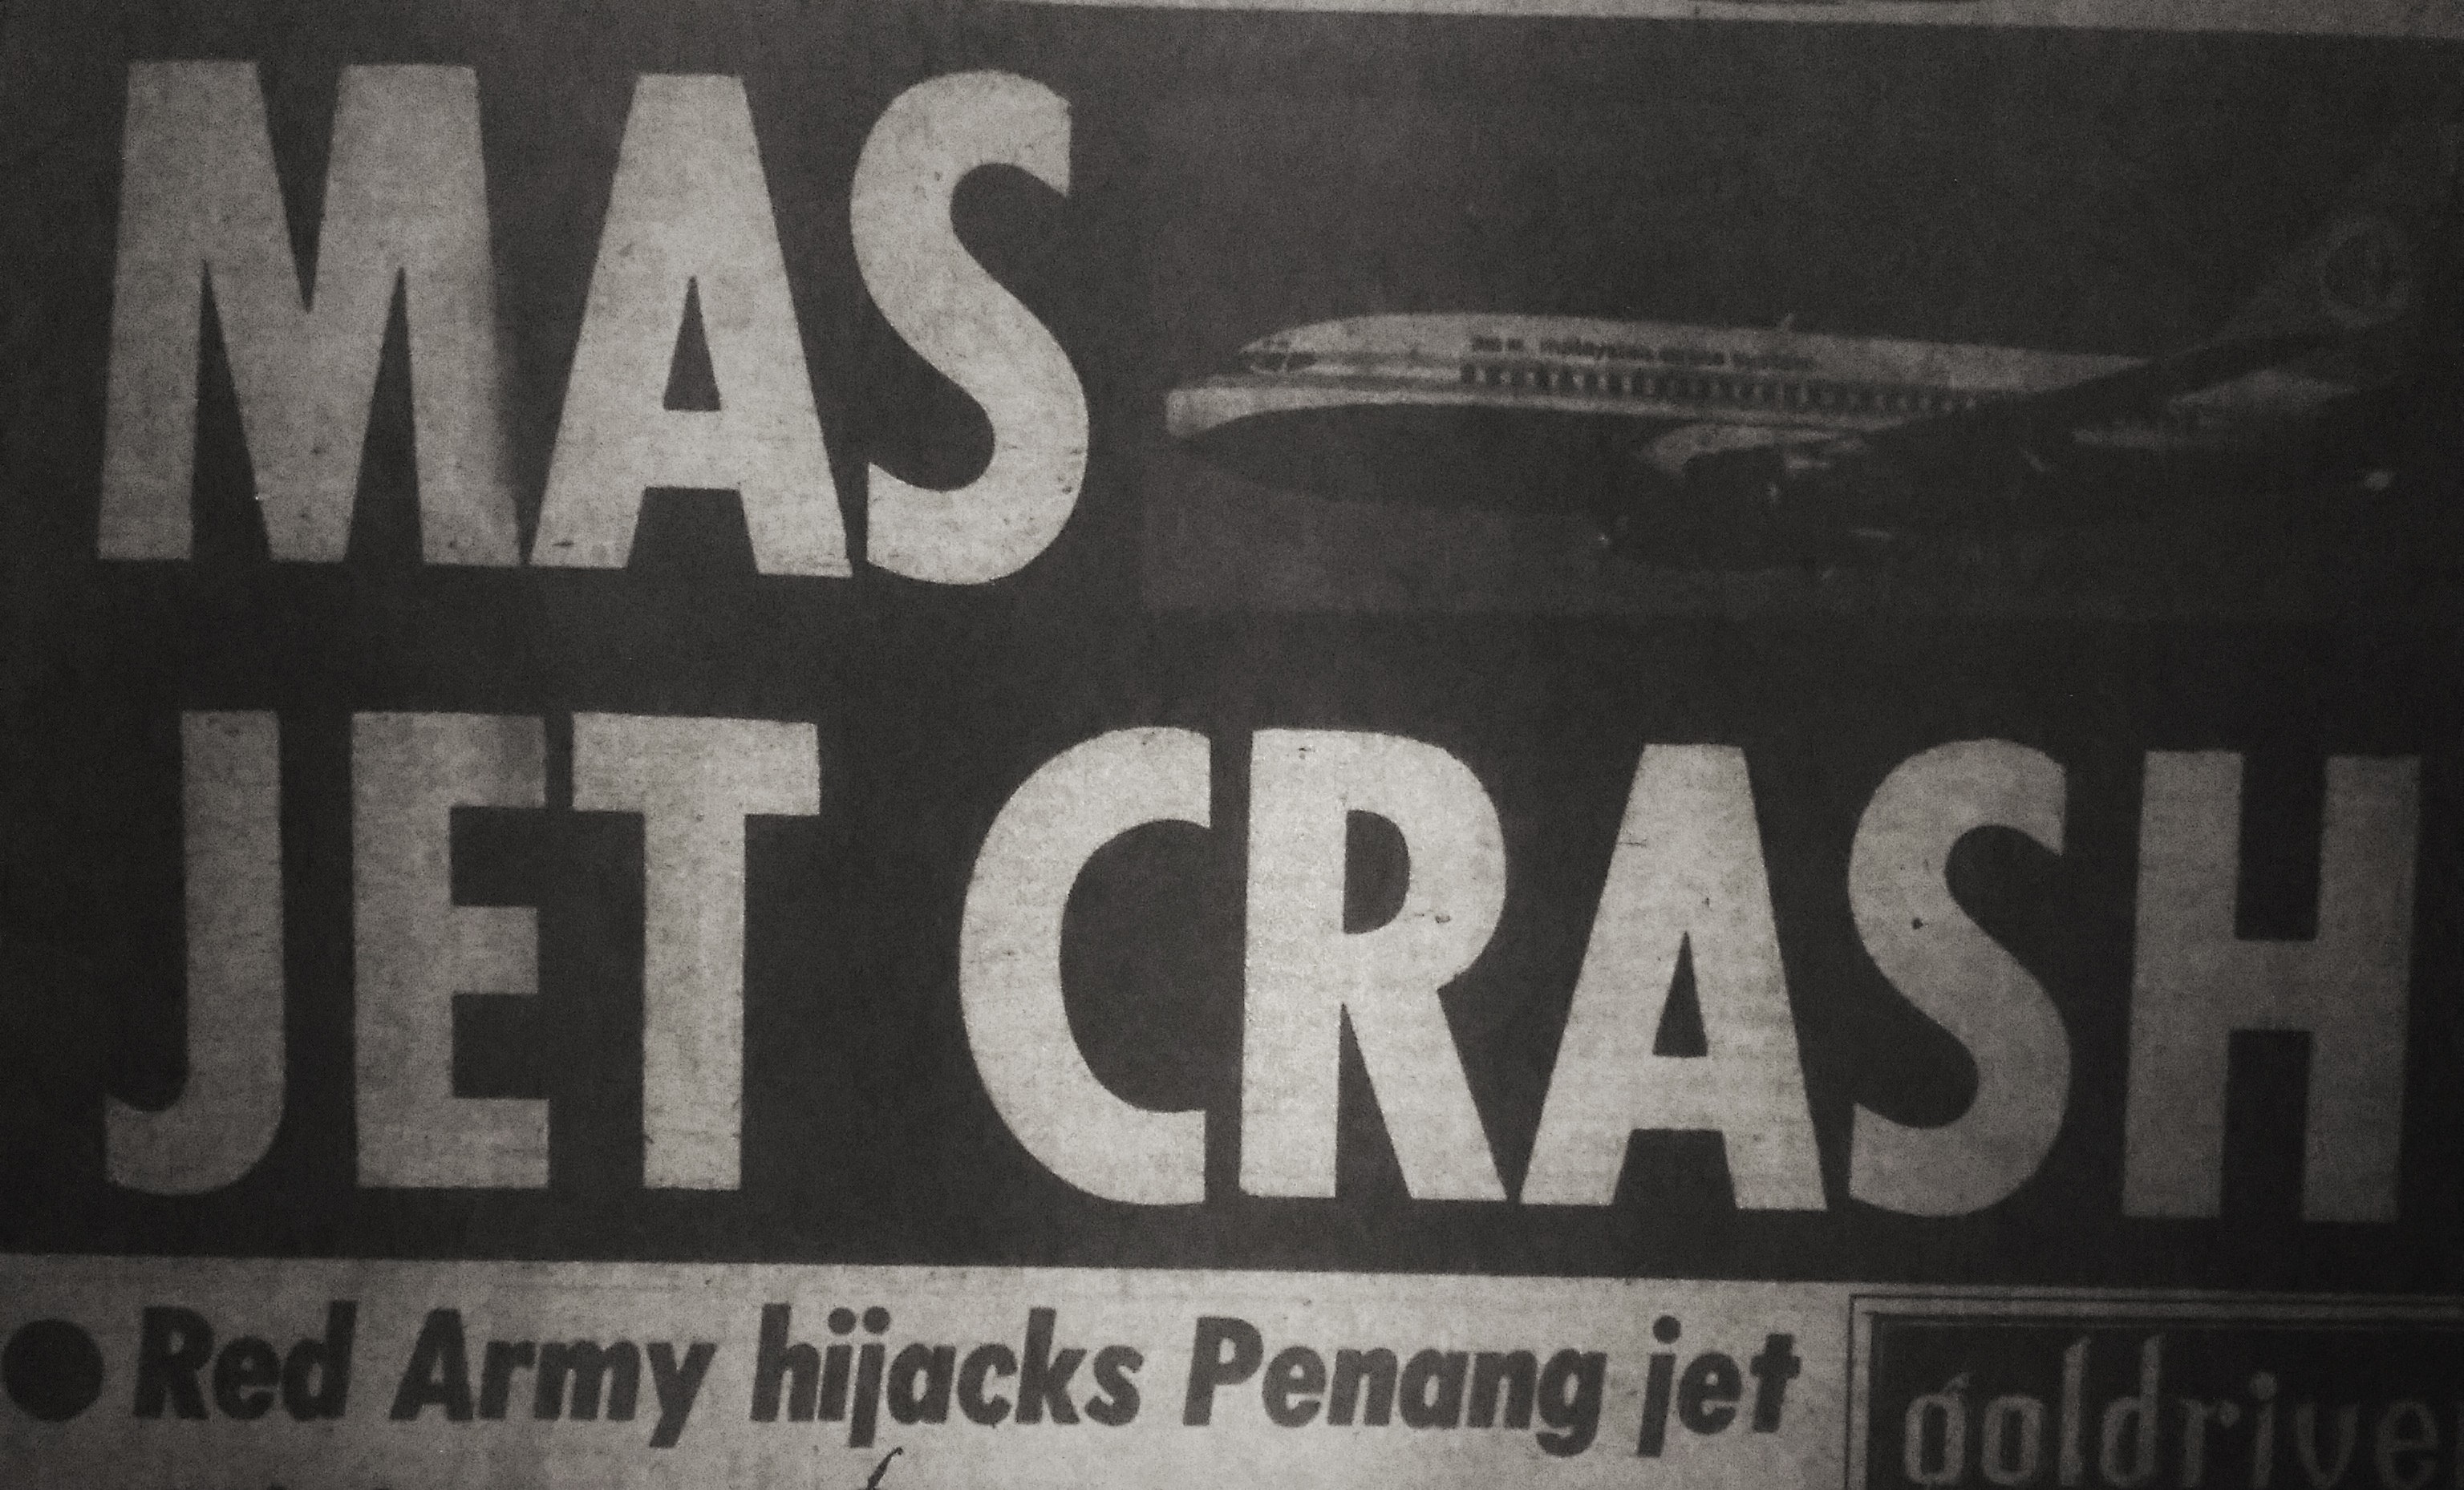 The Star going with Red Army hijacks Penang jet as one of their subheaders. 